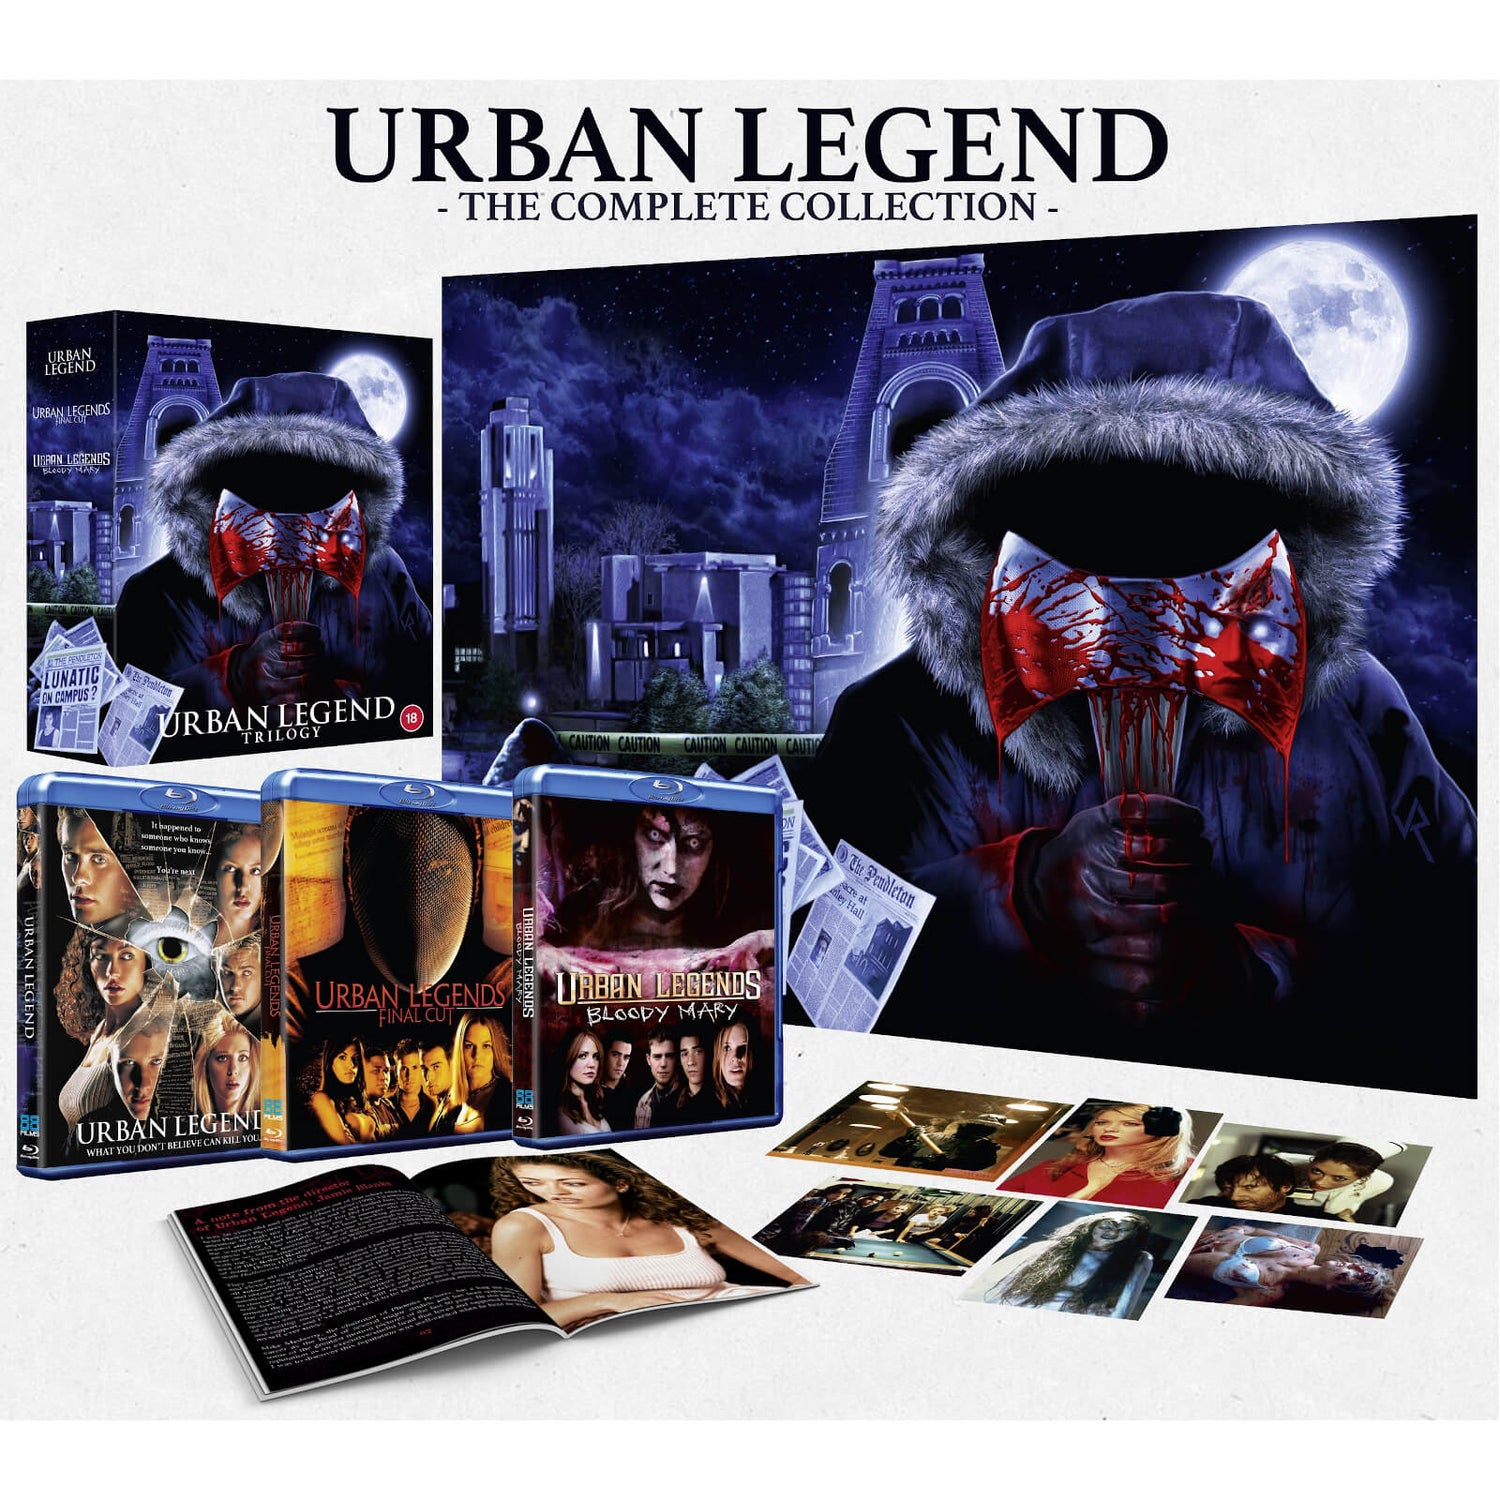 Urban Legend Trilogie - Deluxe Limited Edition